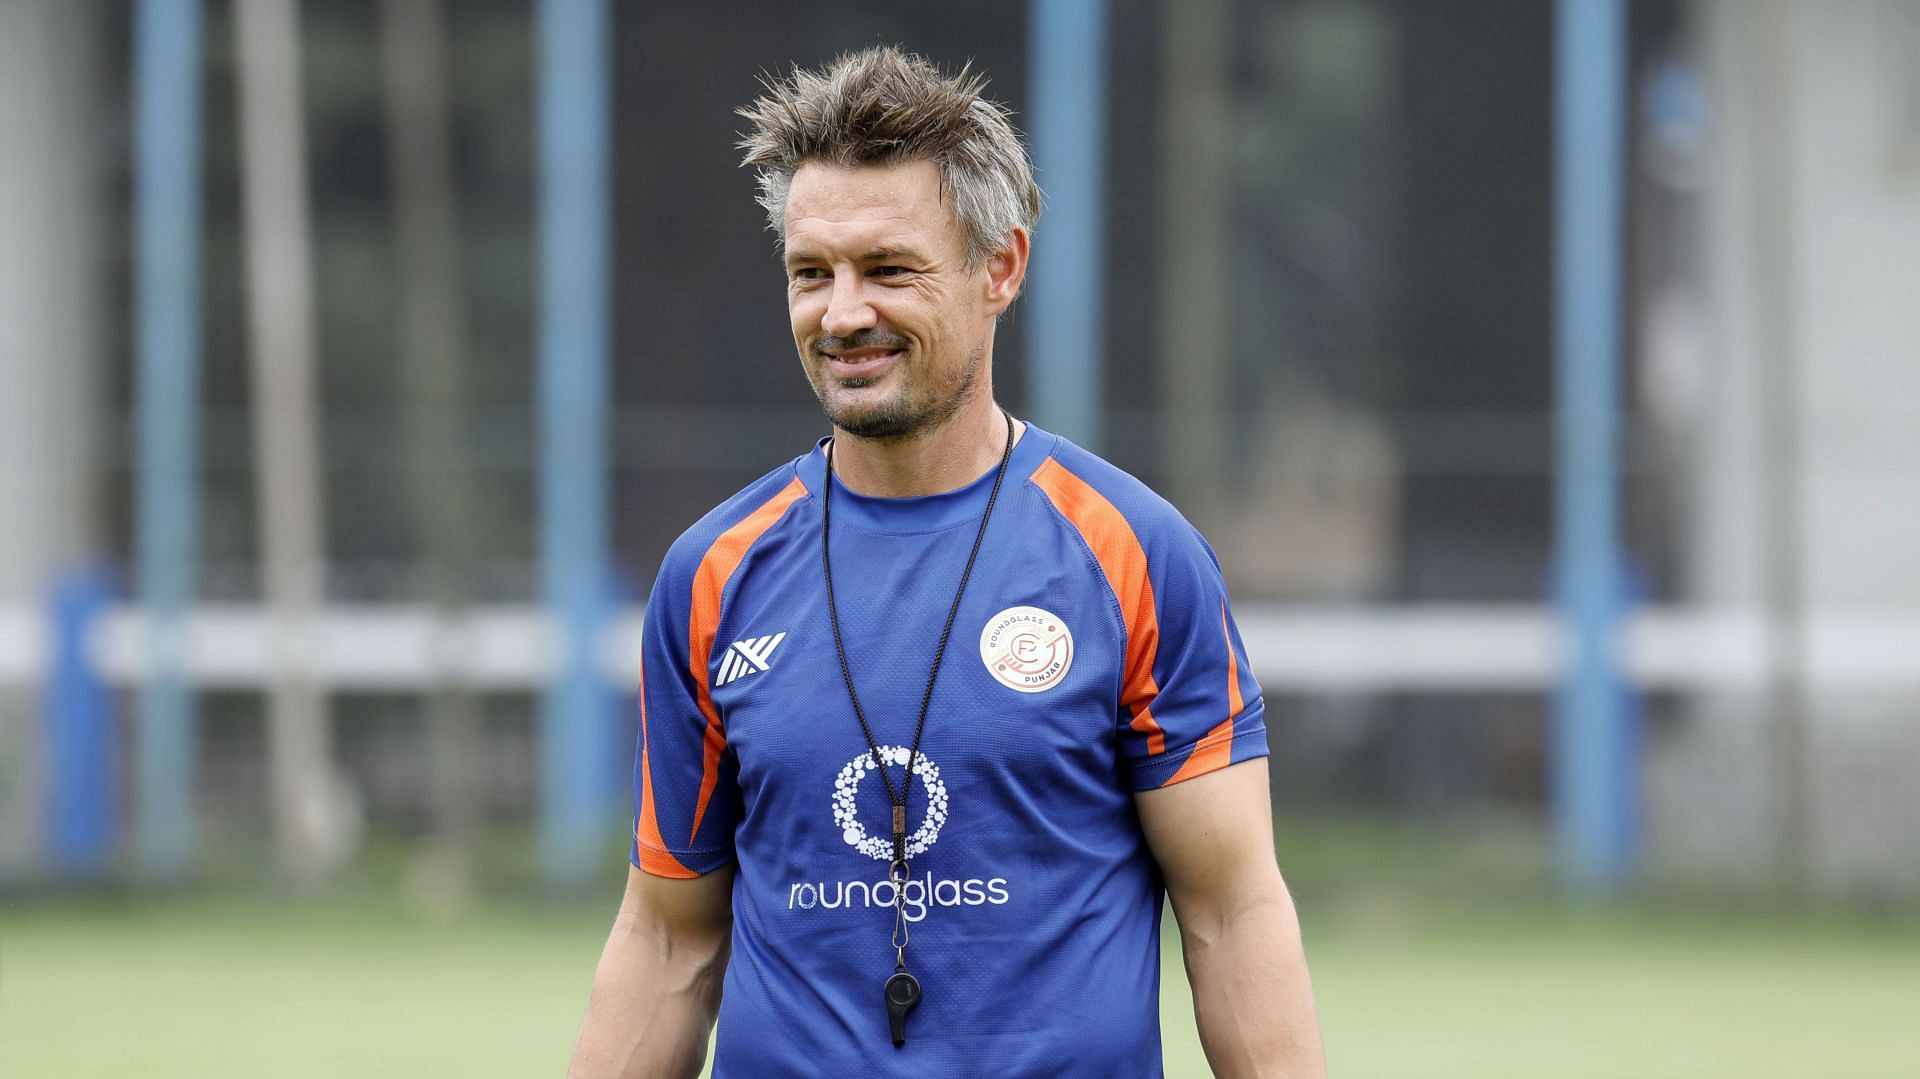 Ashley Westwood has been announced as RoundGlass Punjab head coach. (Image: RoundGlass)